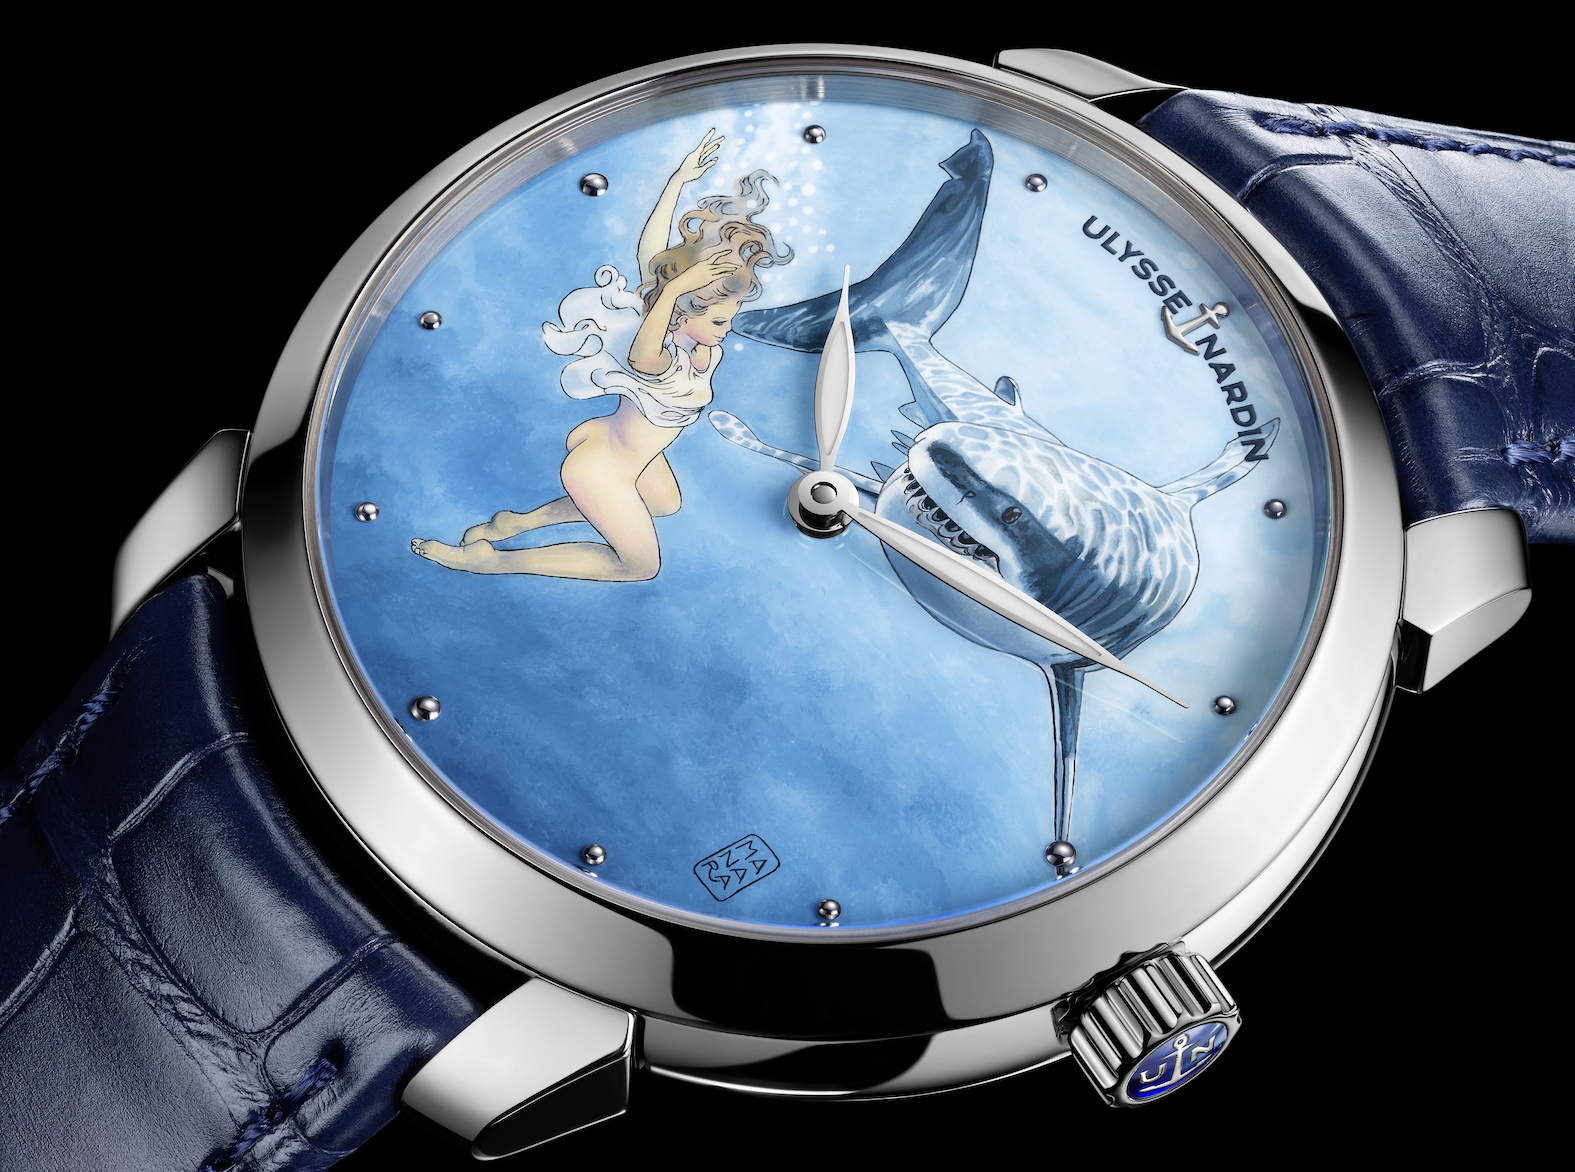 Sihh 2019 Ulysse Nardin Classico Erotic Watches